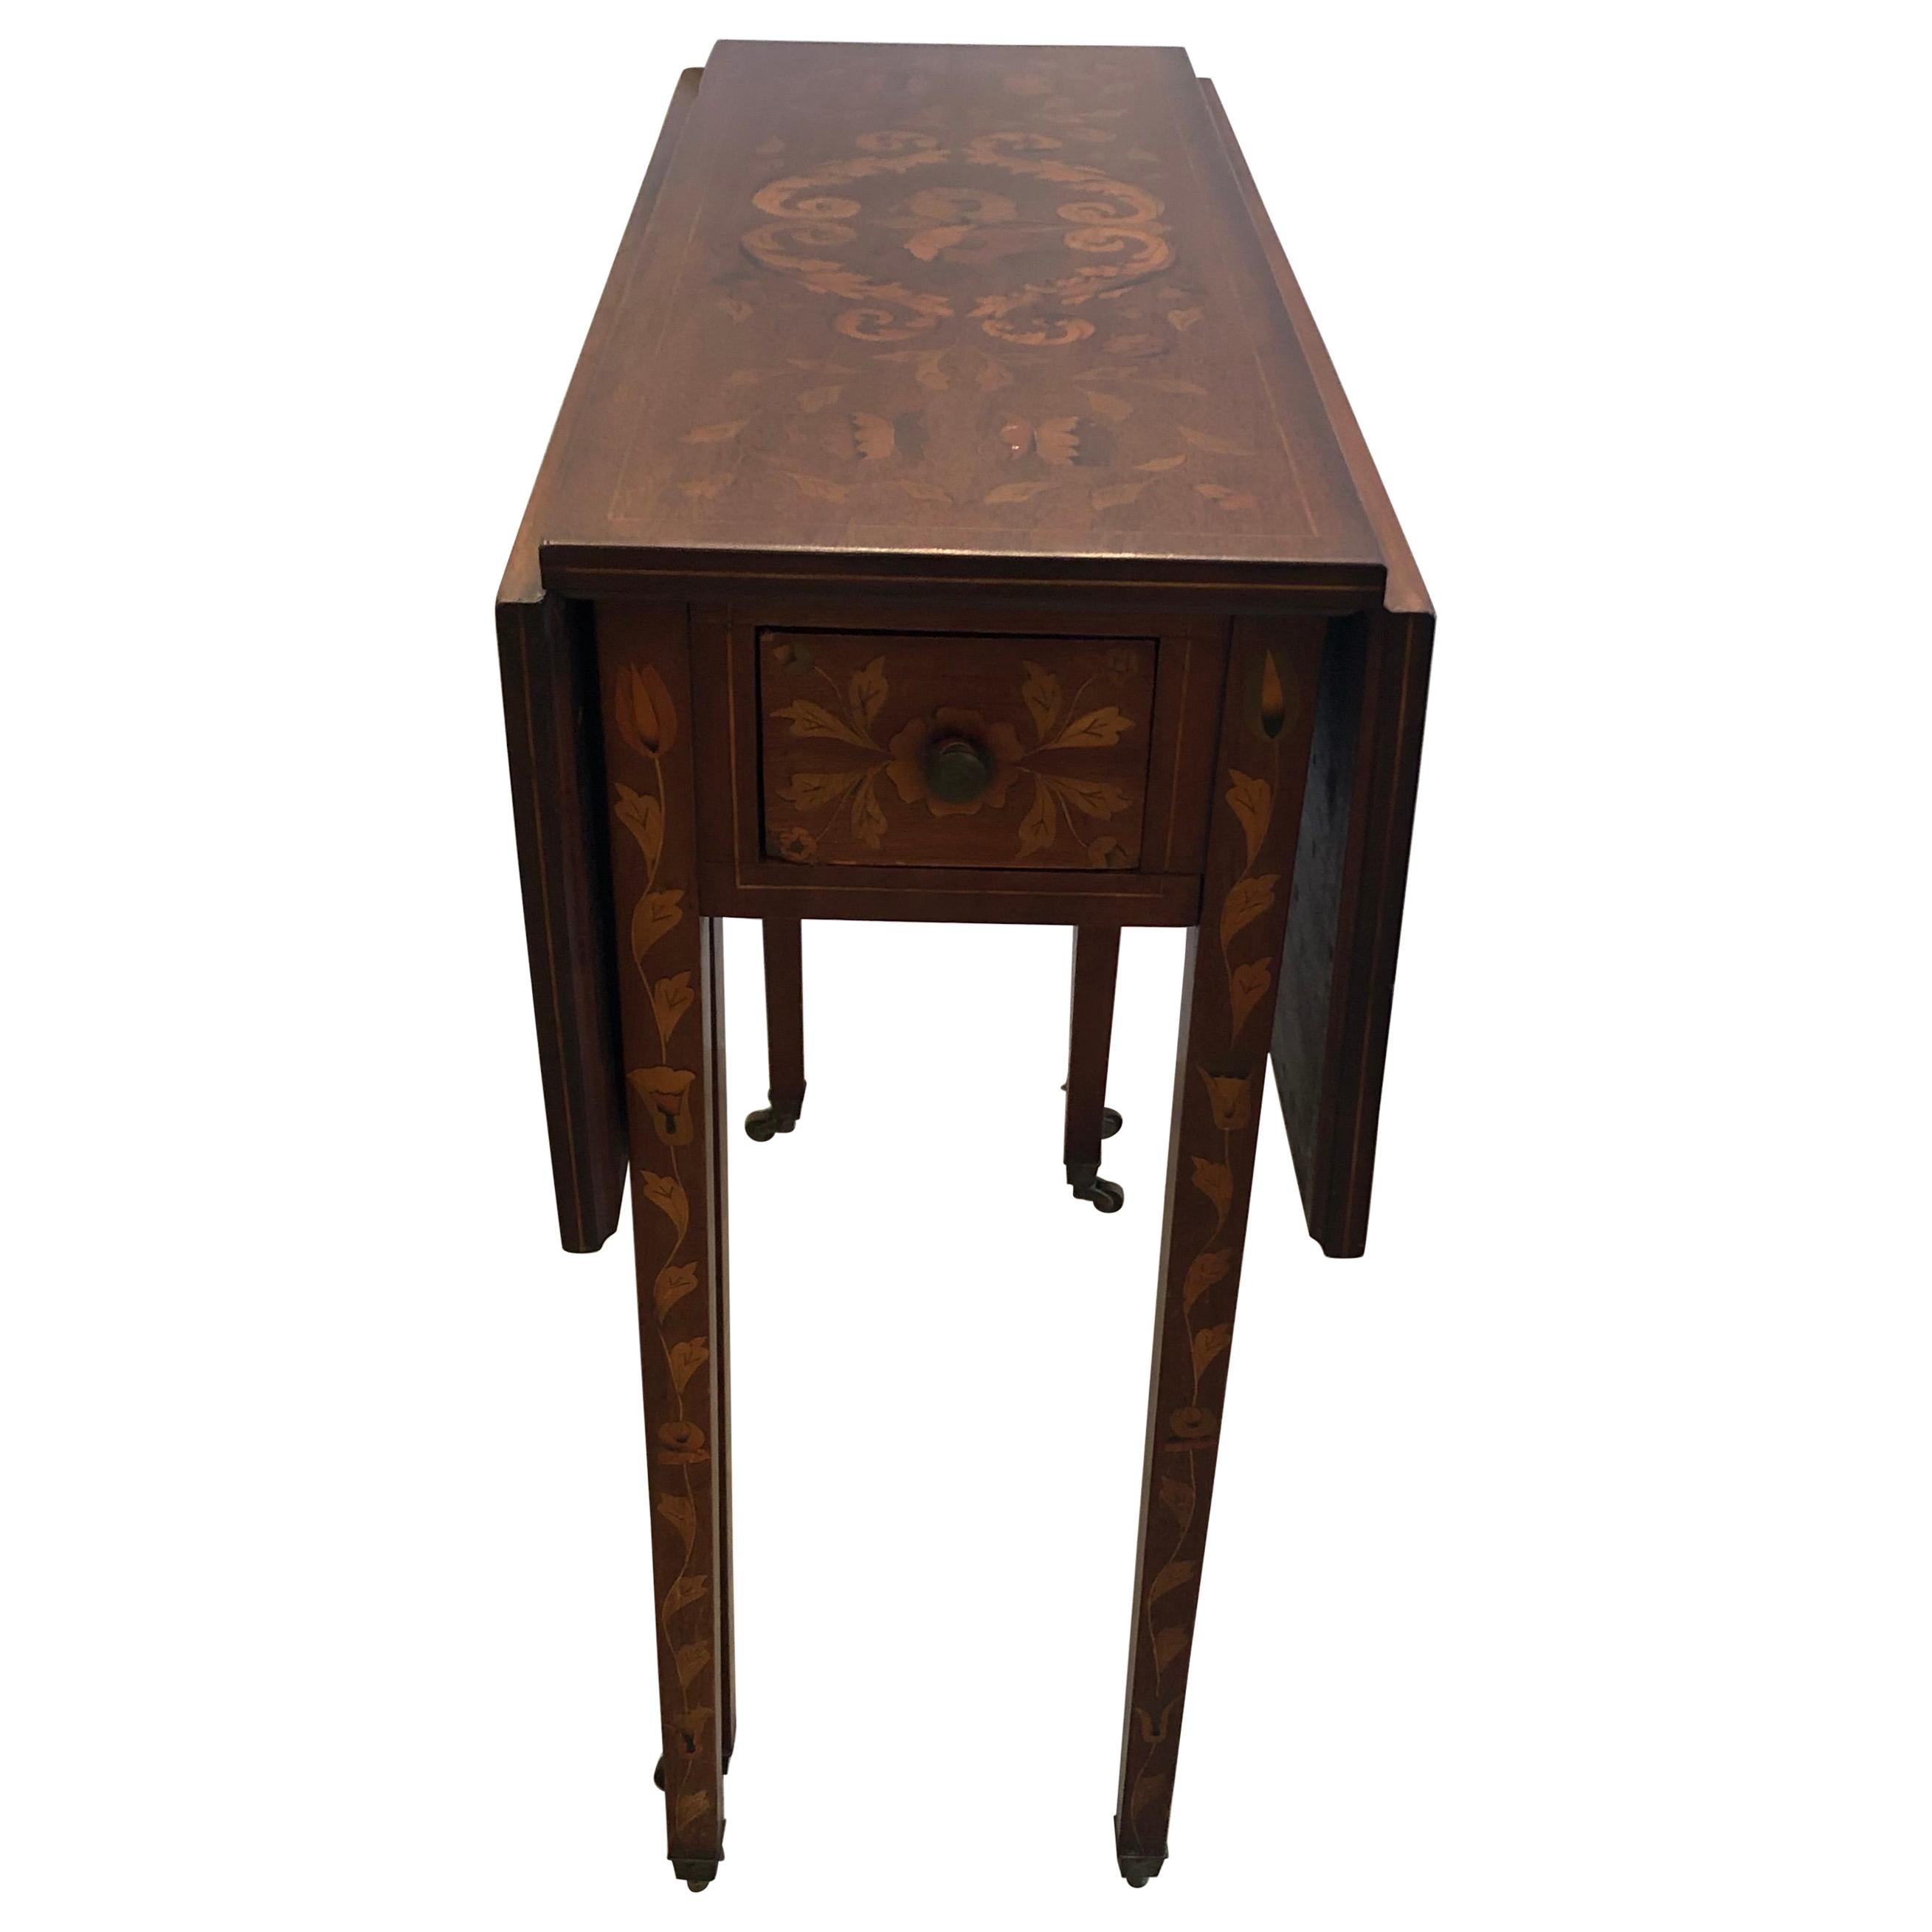 Magnificent Neoclassical Dutch Marquetry Drop-Leaf Pembroke Table